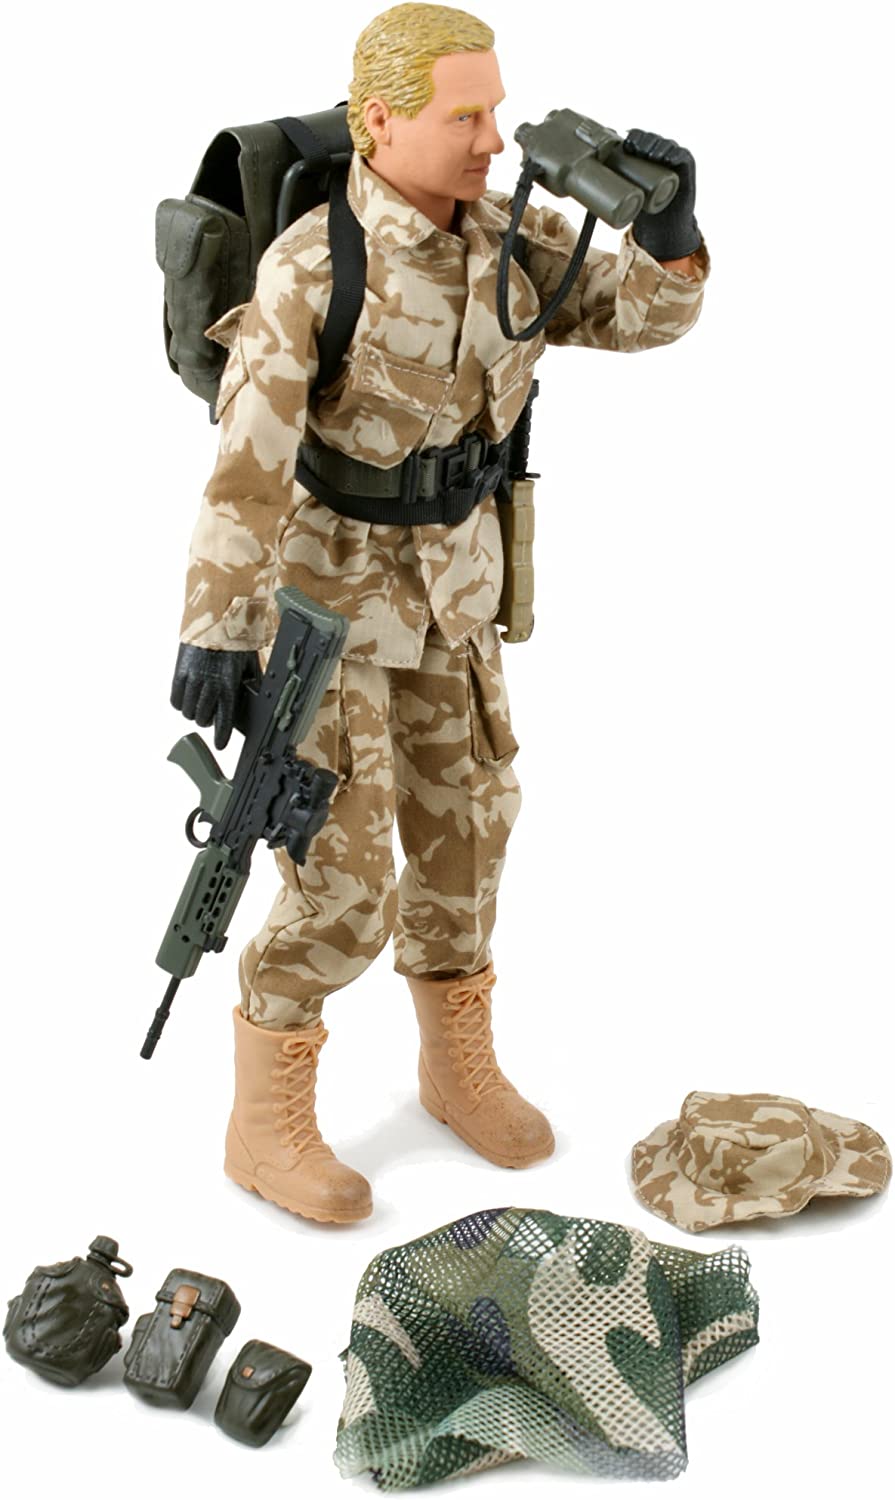 S.A.S Peacekeeper 12" Action Figure